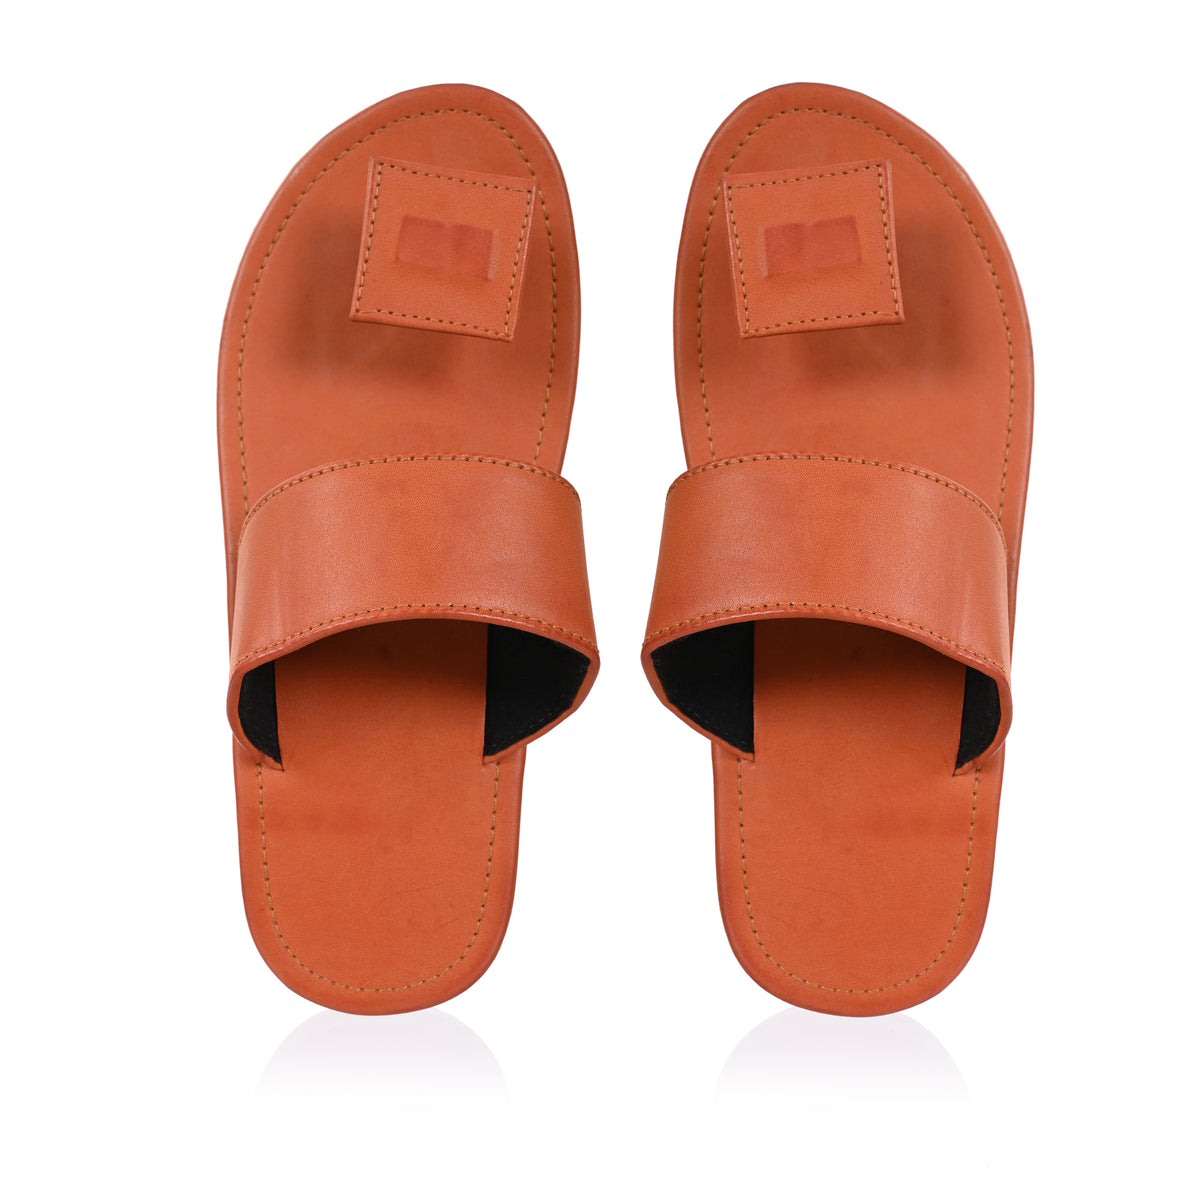 Pure Leather Chappal/Slippers For Men